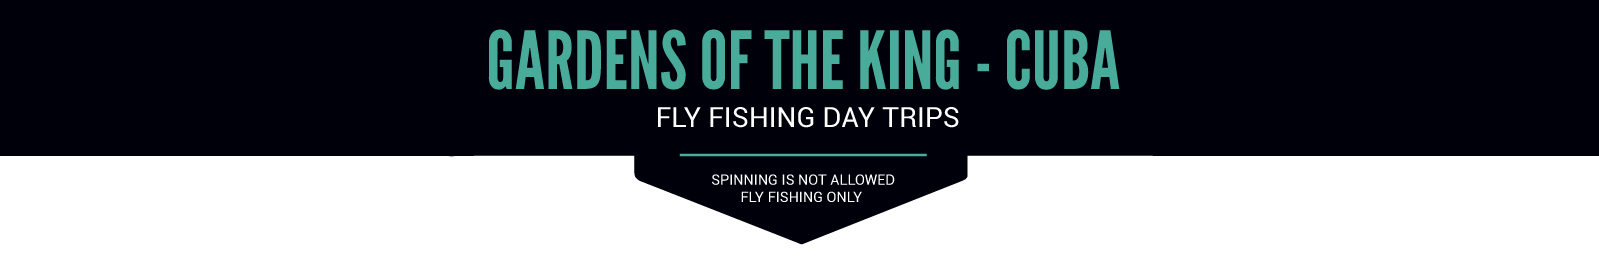 Fly Fishing day trips | Gardens of the King 